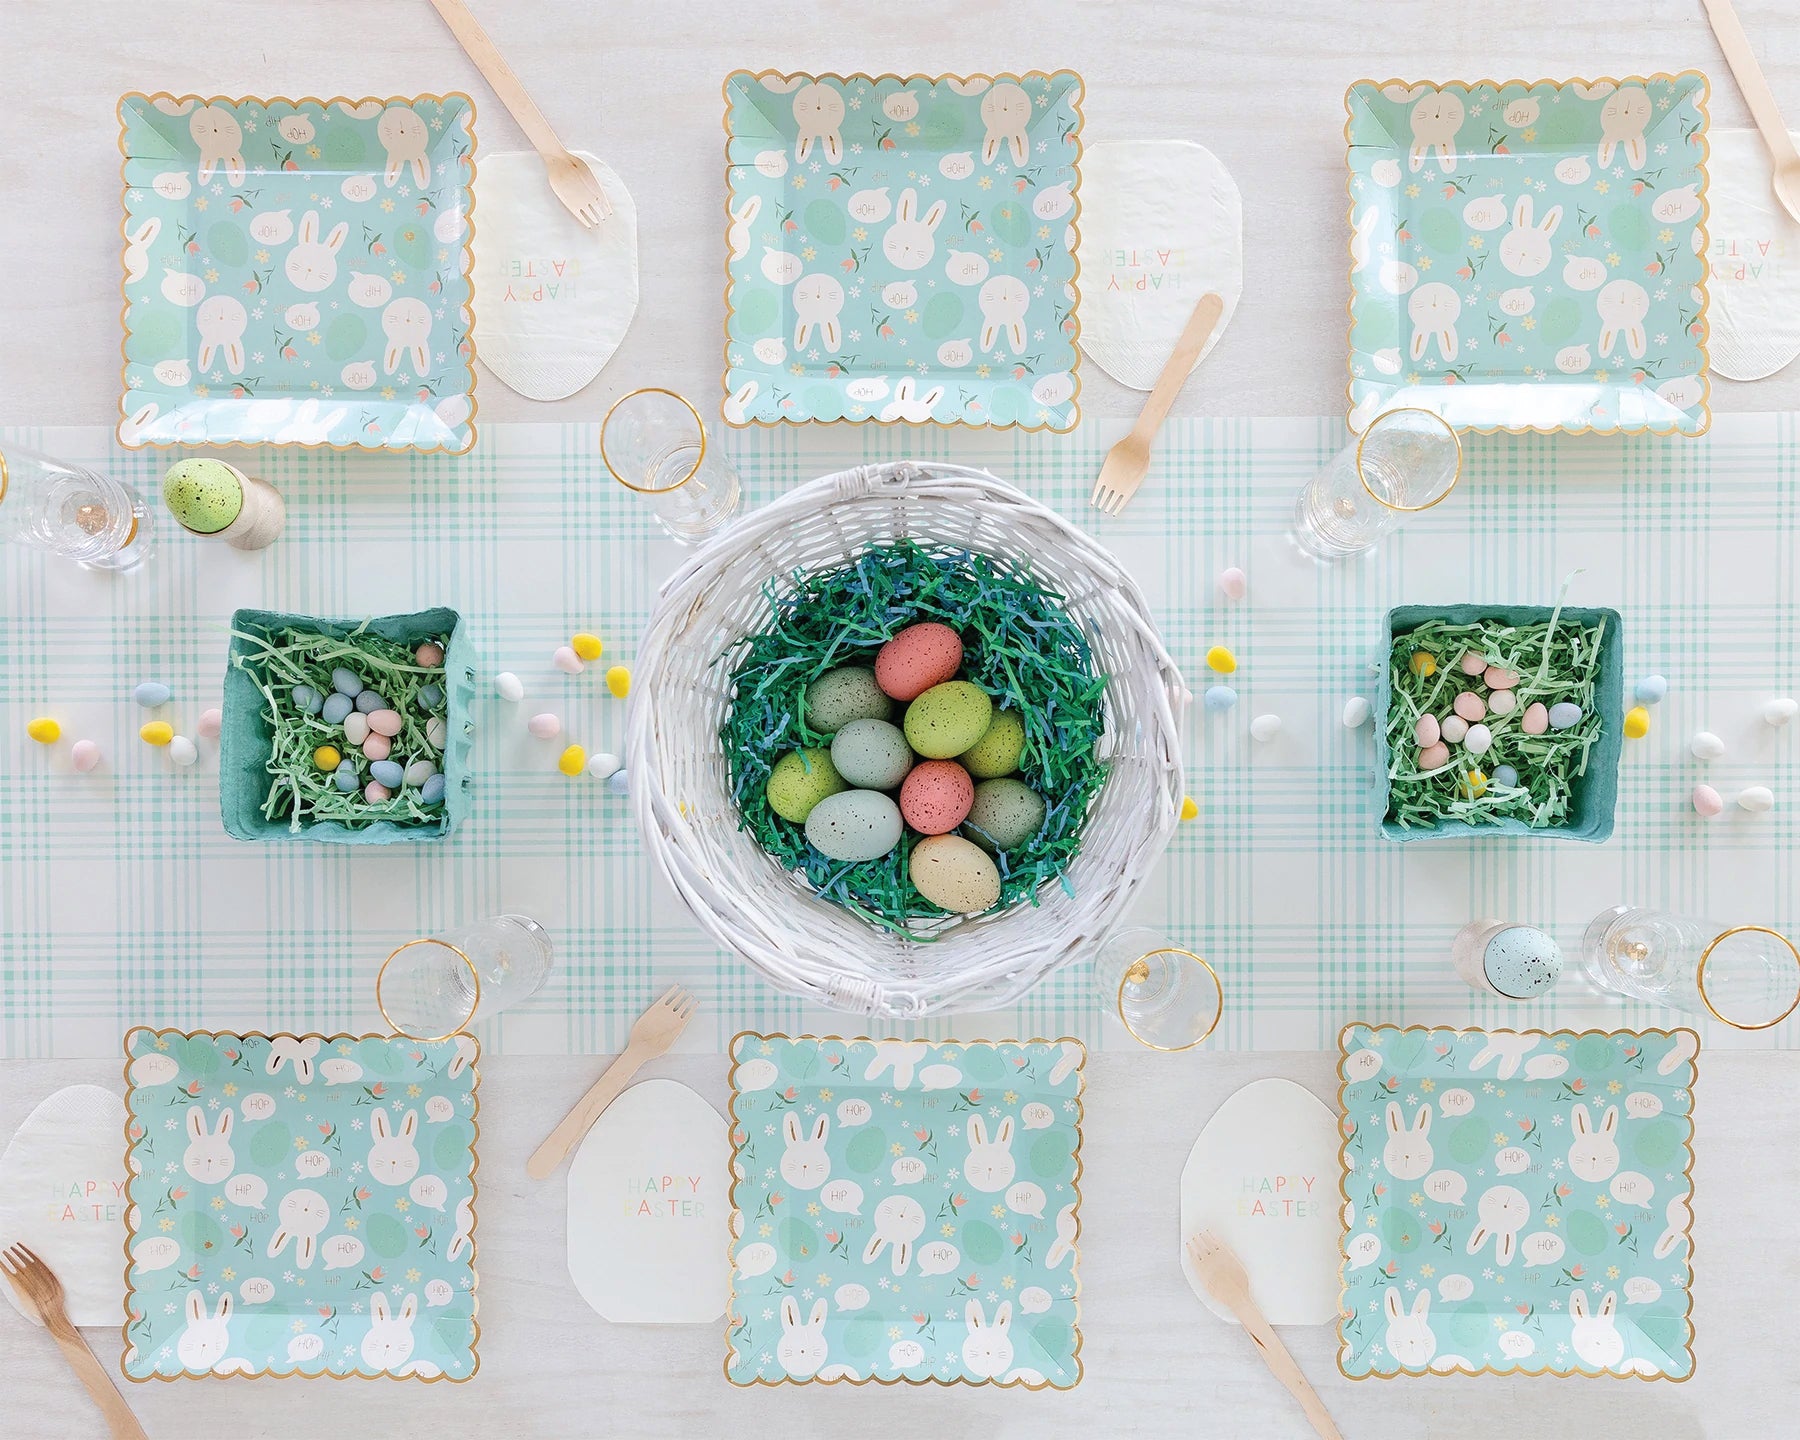 Blue Plaid Paper Table Runner | The Party Darling